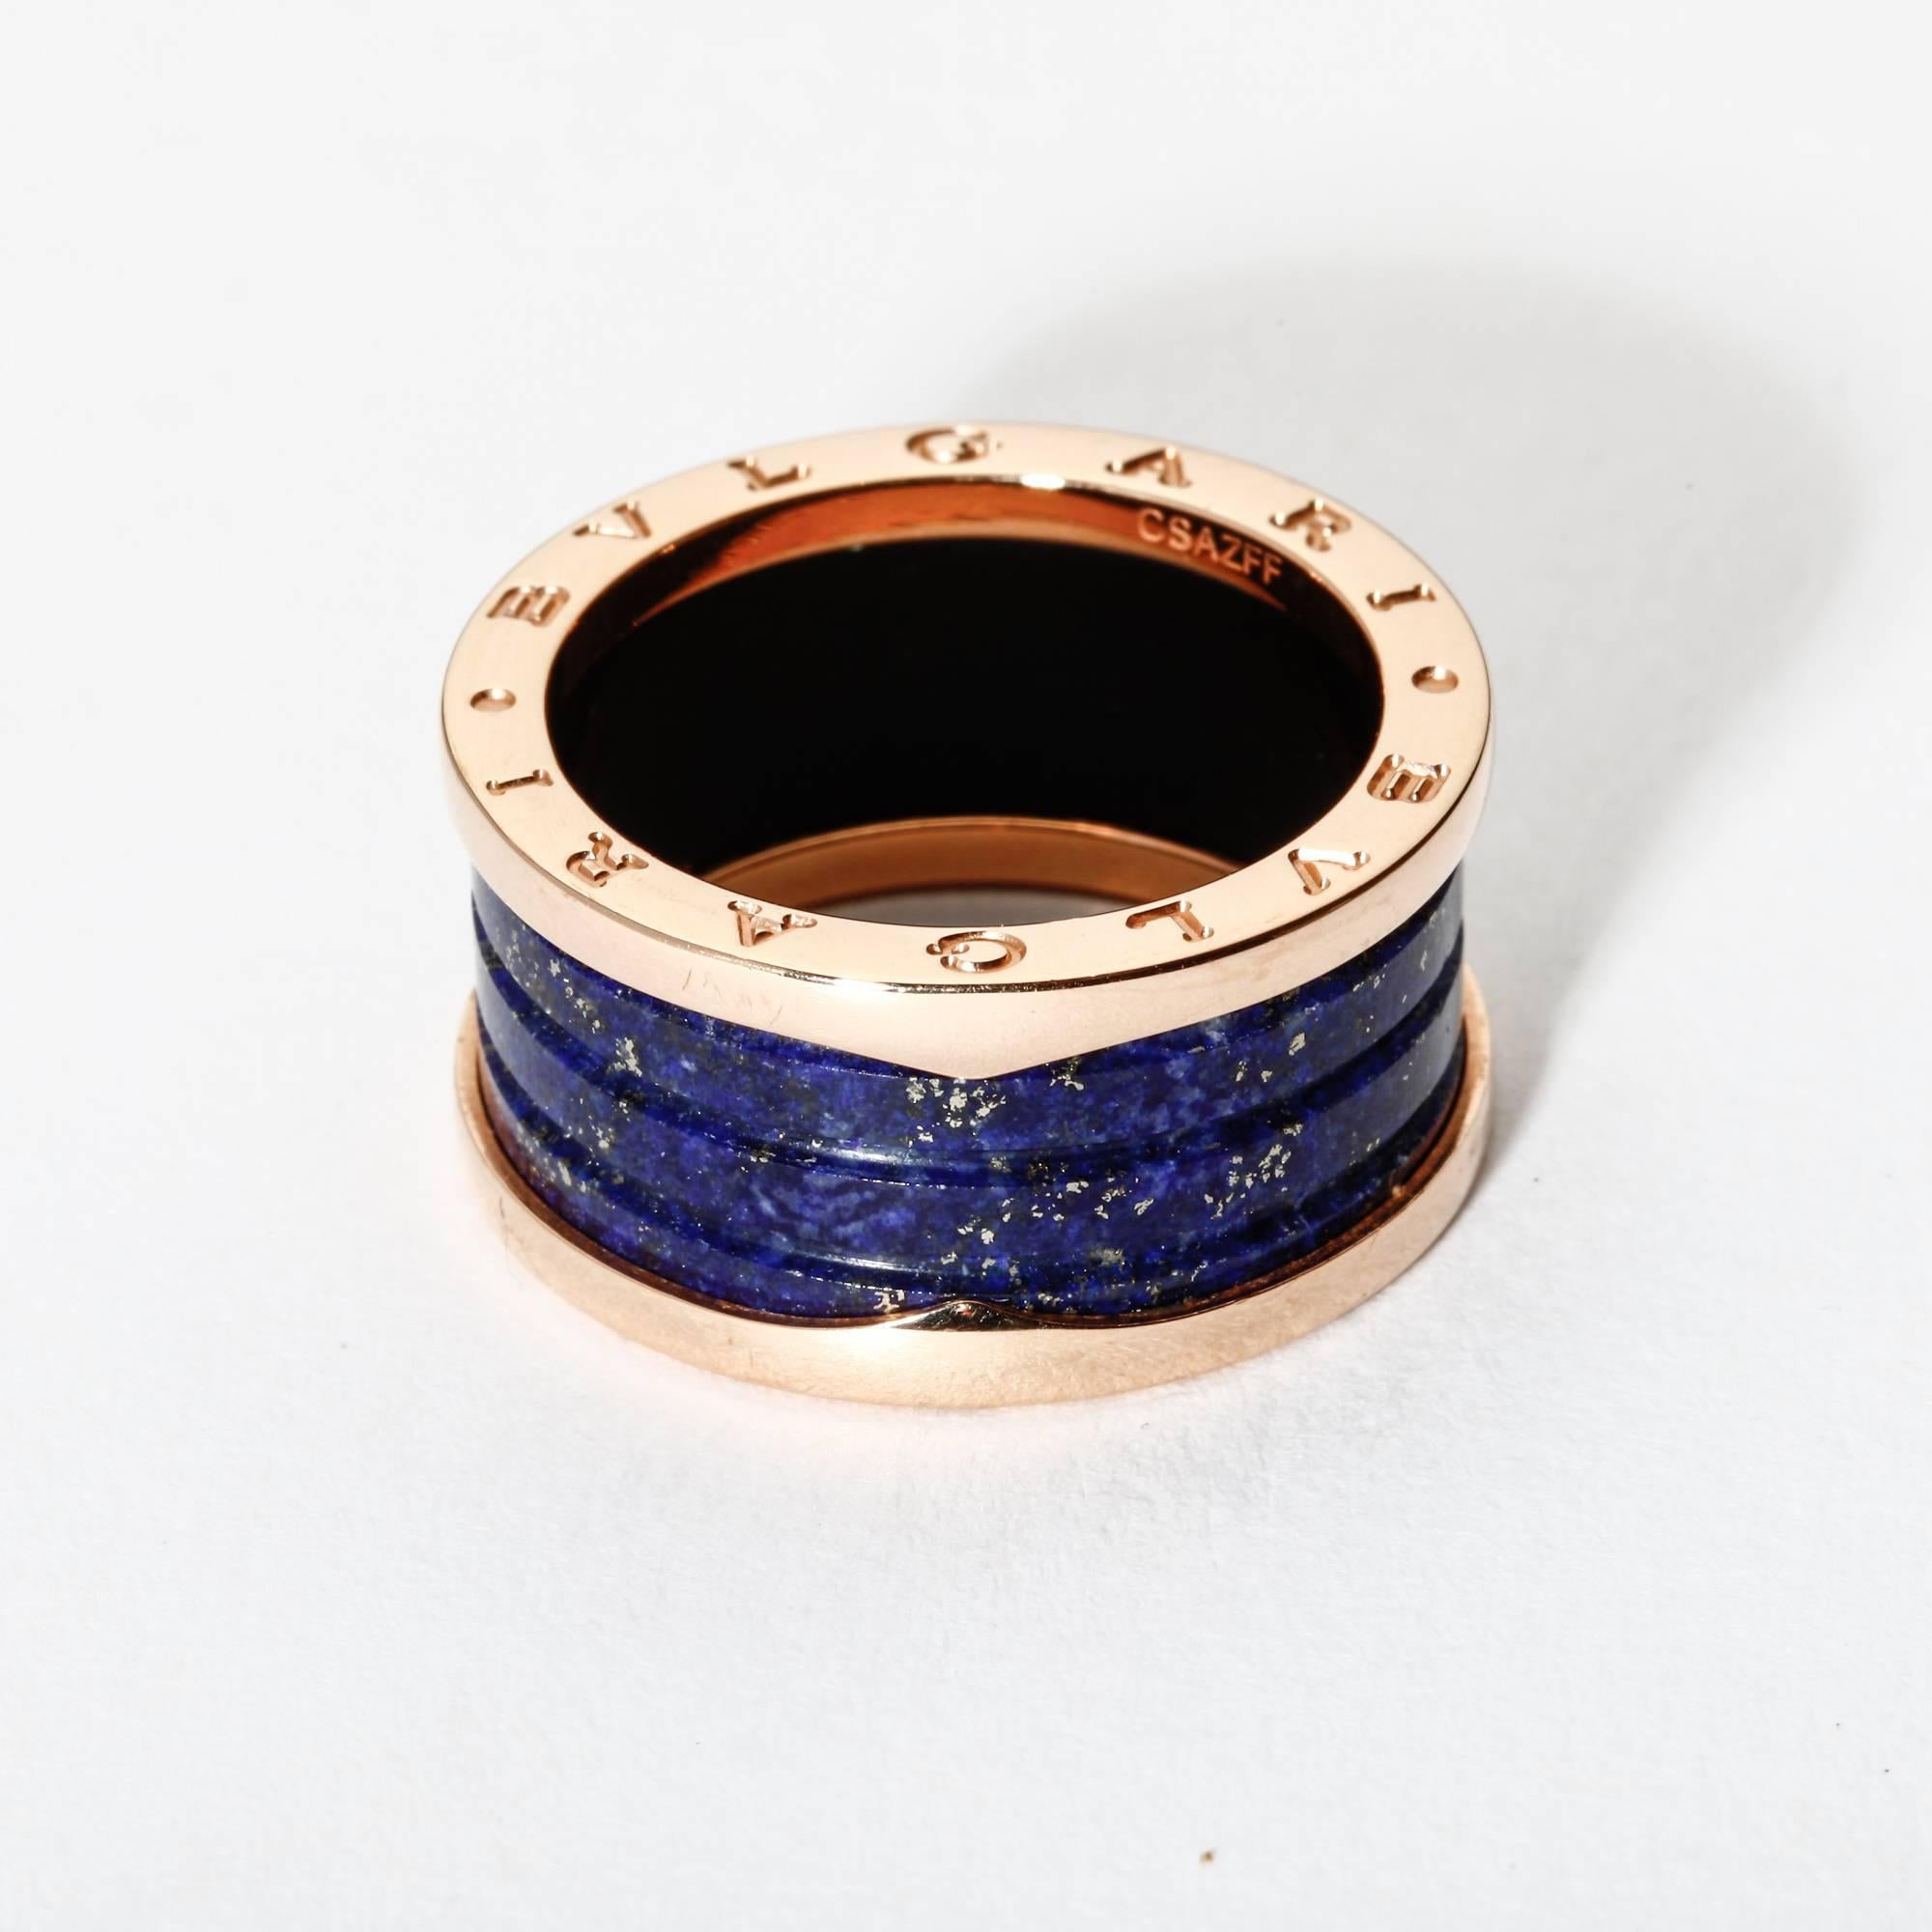 Inspired by the Colosseum in Rome, this 18k rose gold and lapis lazuli Bulgari B.zero1 ring represents both the eternal city and modern Italian design. The ring is in new condition and would make a perfect gift. Please note that it is a Bulgari size